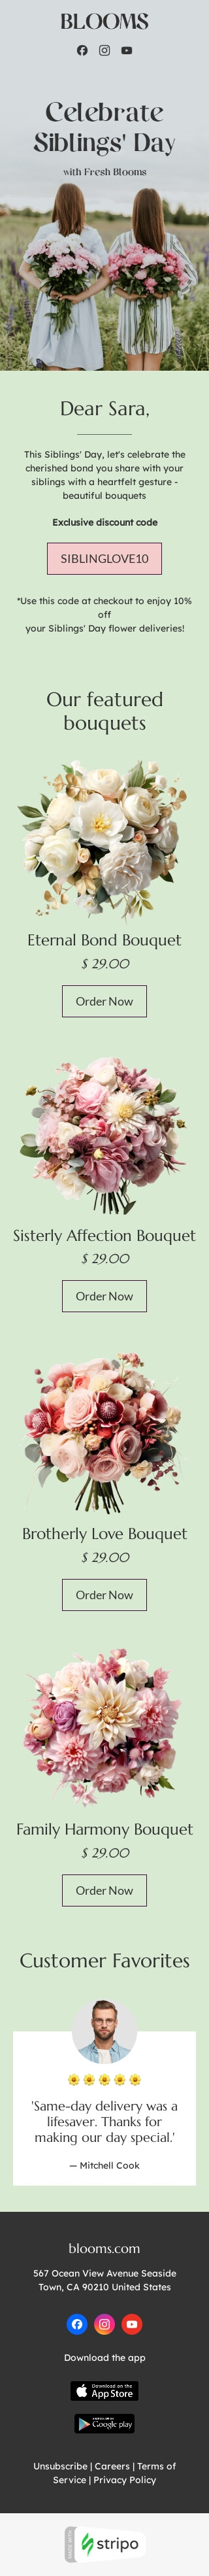 Siblings Day email template "Sibling love" for gifts & flowers industry mobile view